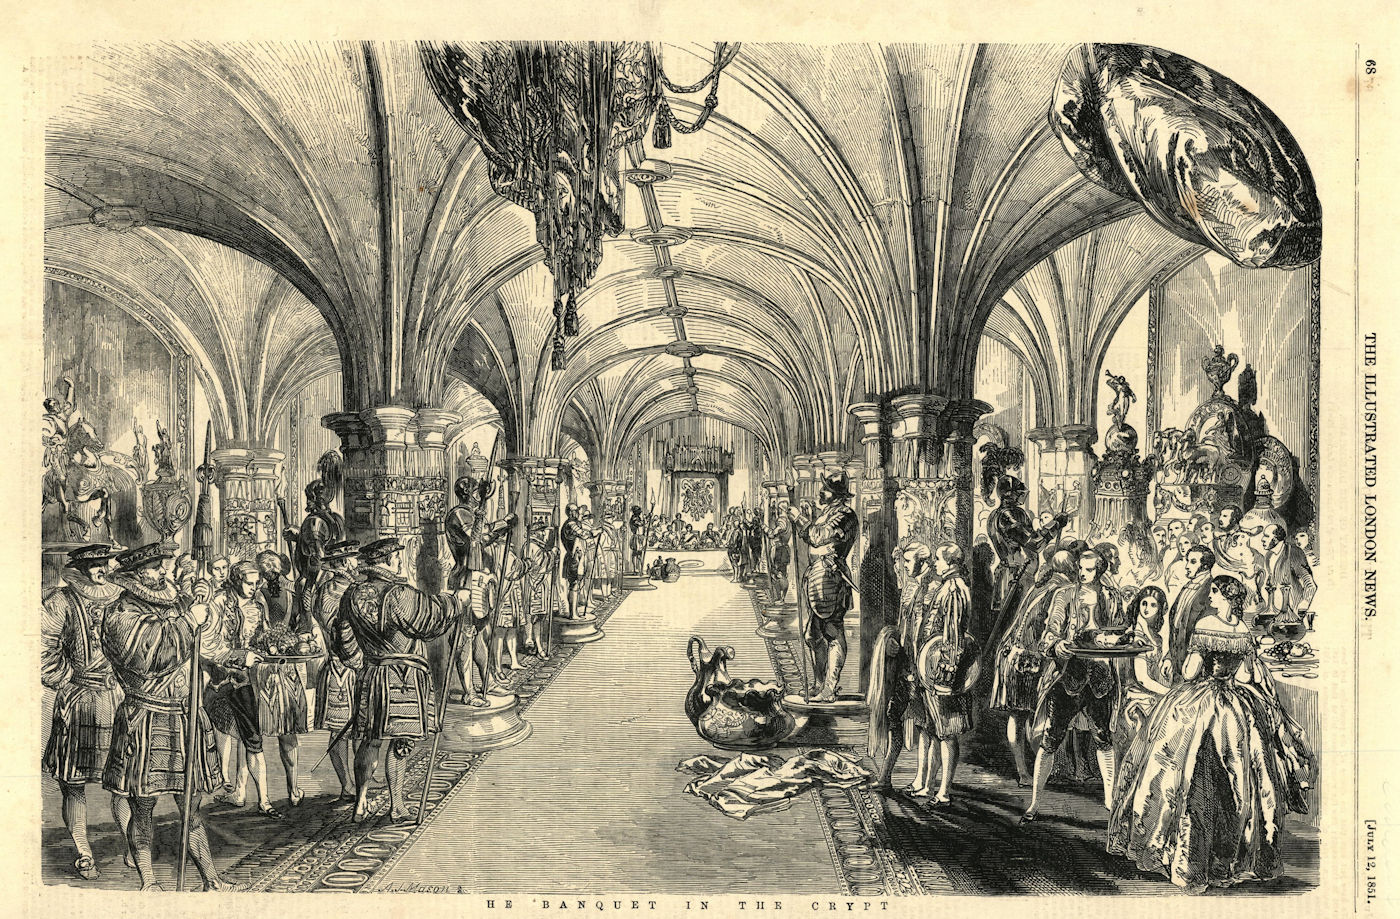 Associate Product The banquet in the crypt. Society. Churches 1851 antique ILN full page print